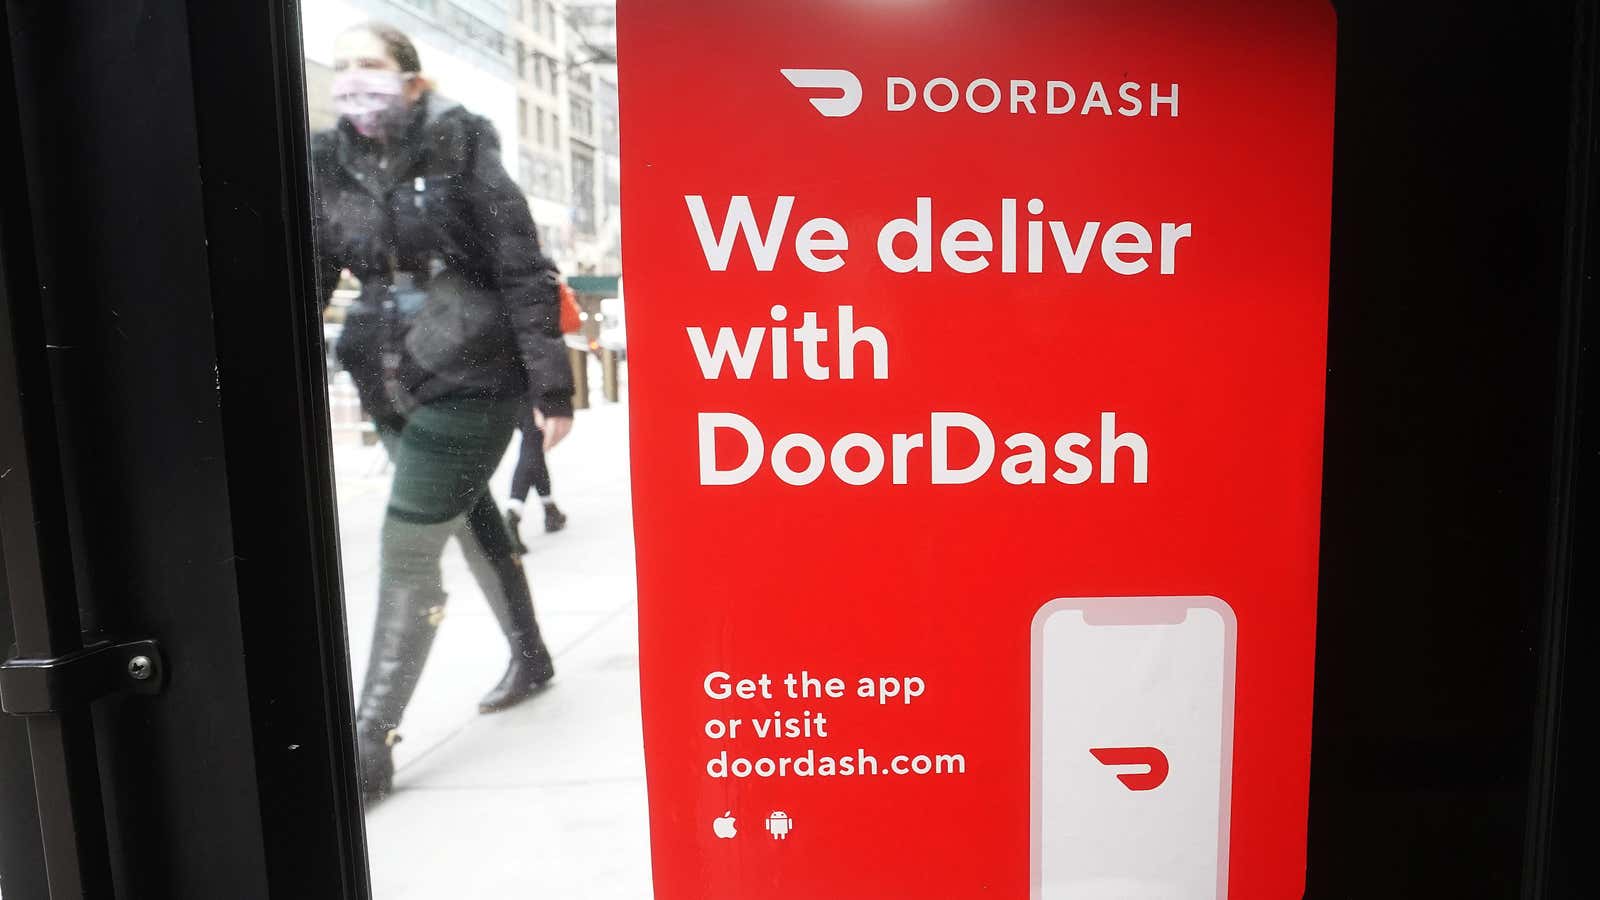 DoorDash is looking to buy up market share, as it continues to remain unprofitable.